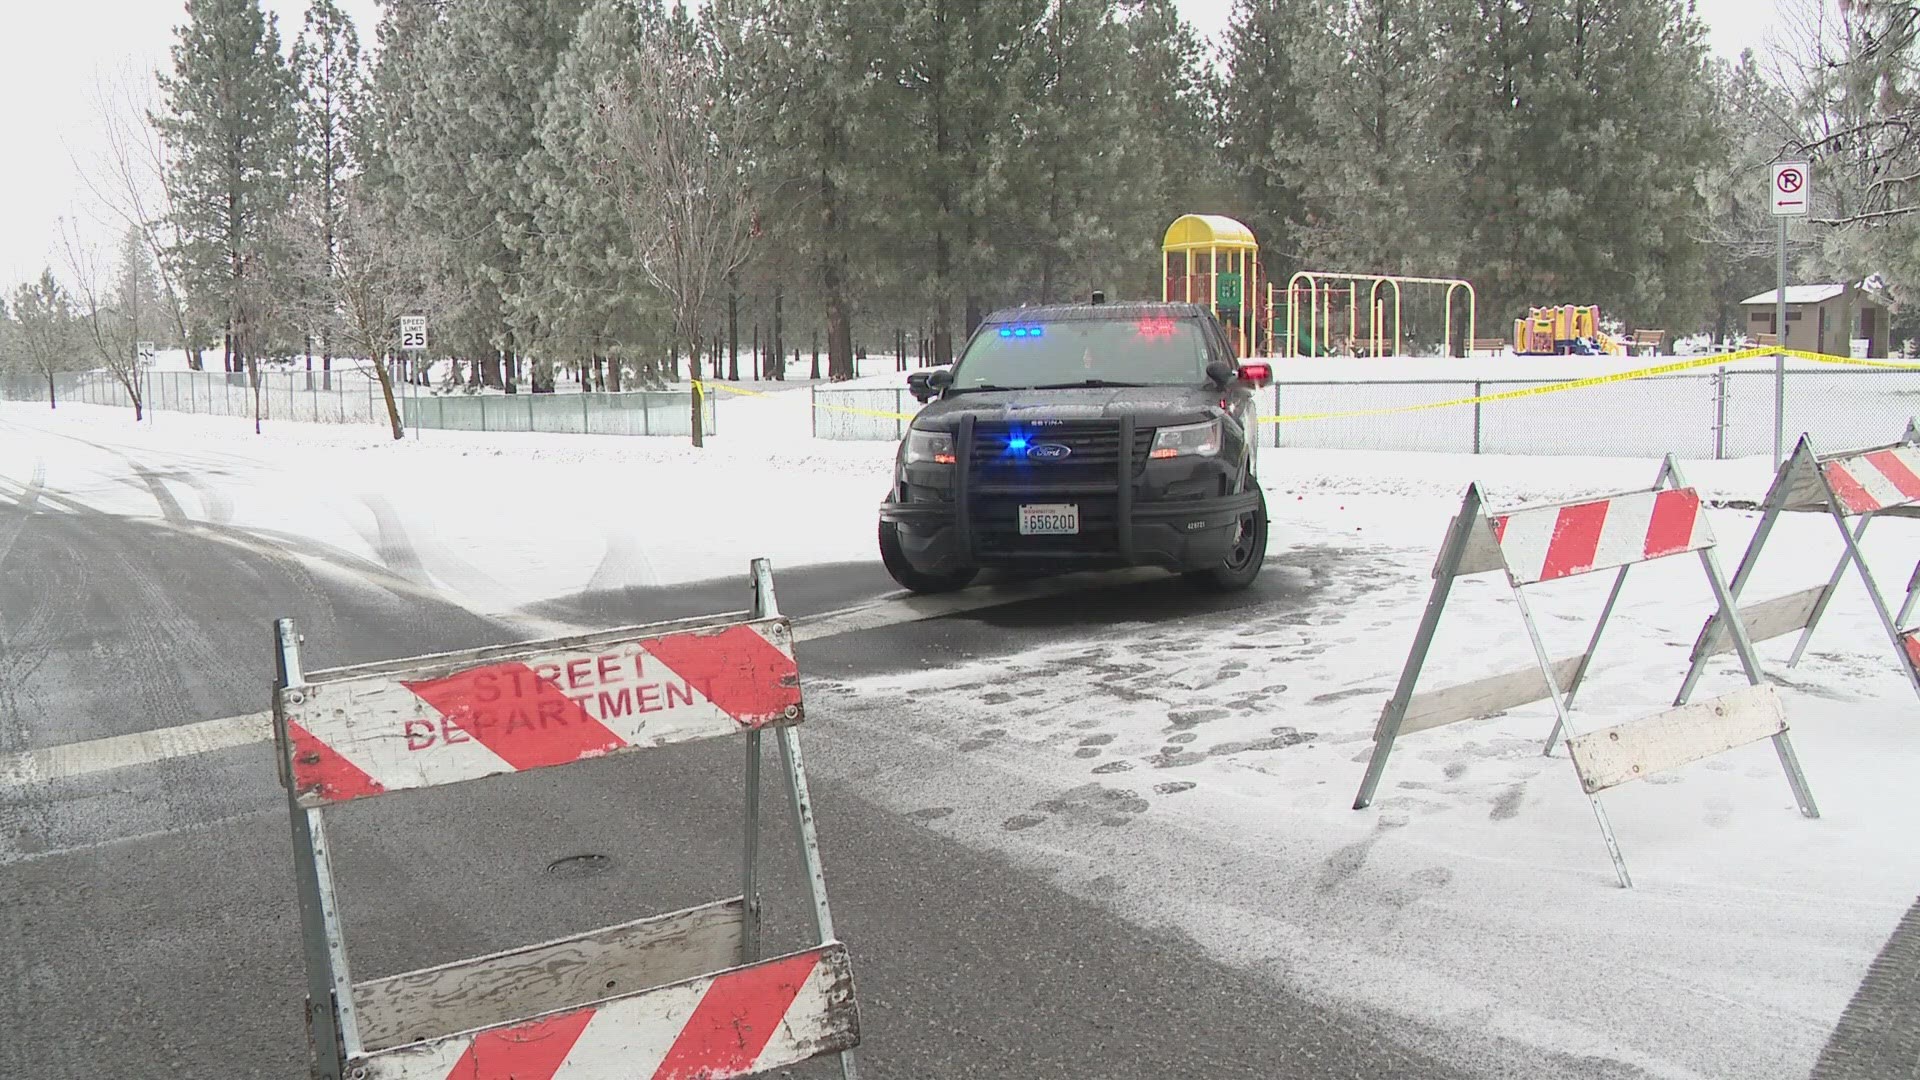 The Spokane County Medical Examiner identified the victim as 34-year-old Kerry Jones-Hilburg.